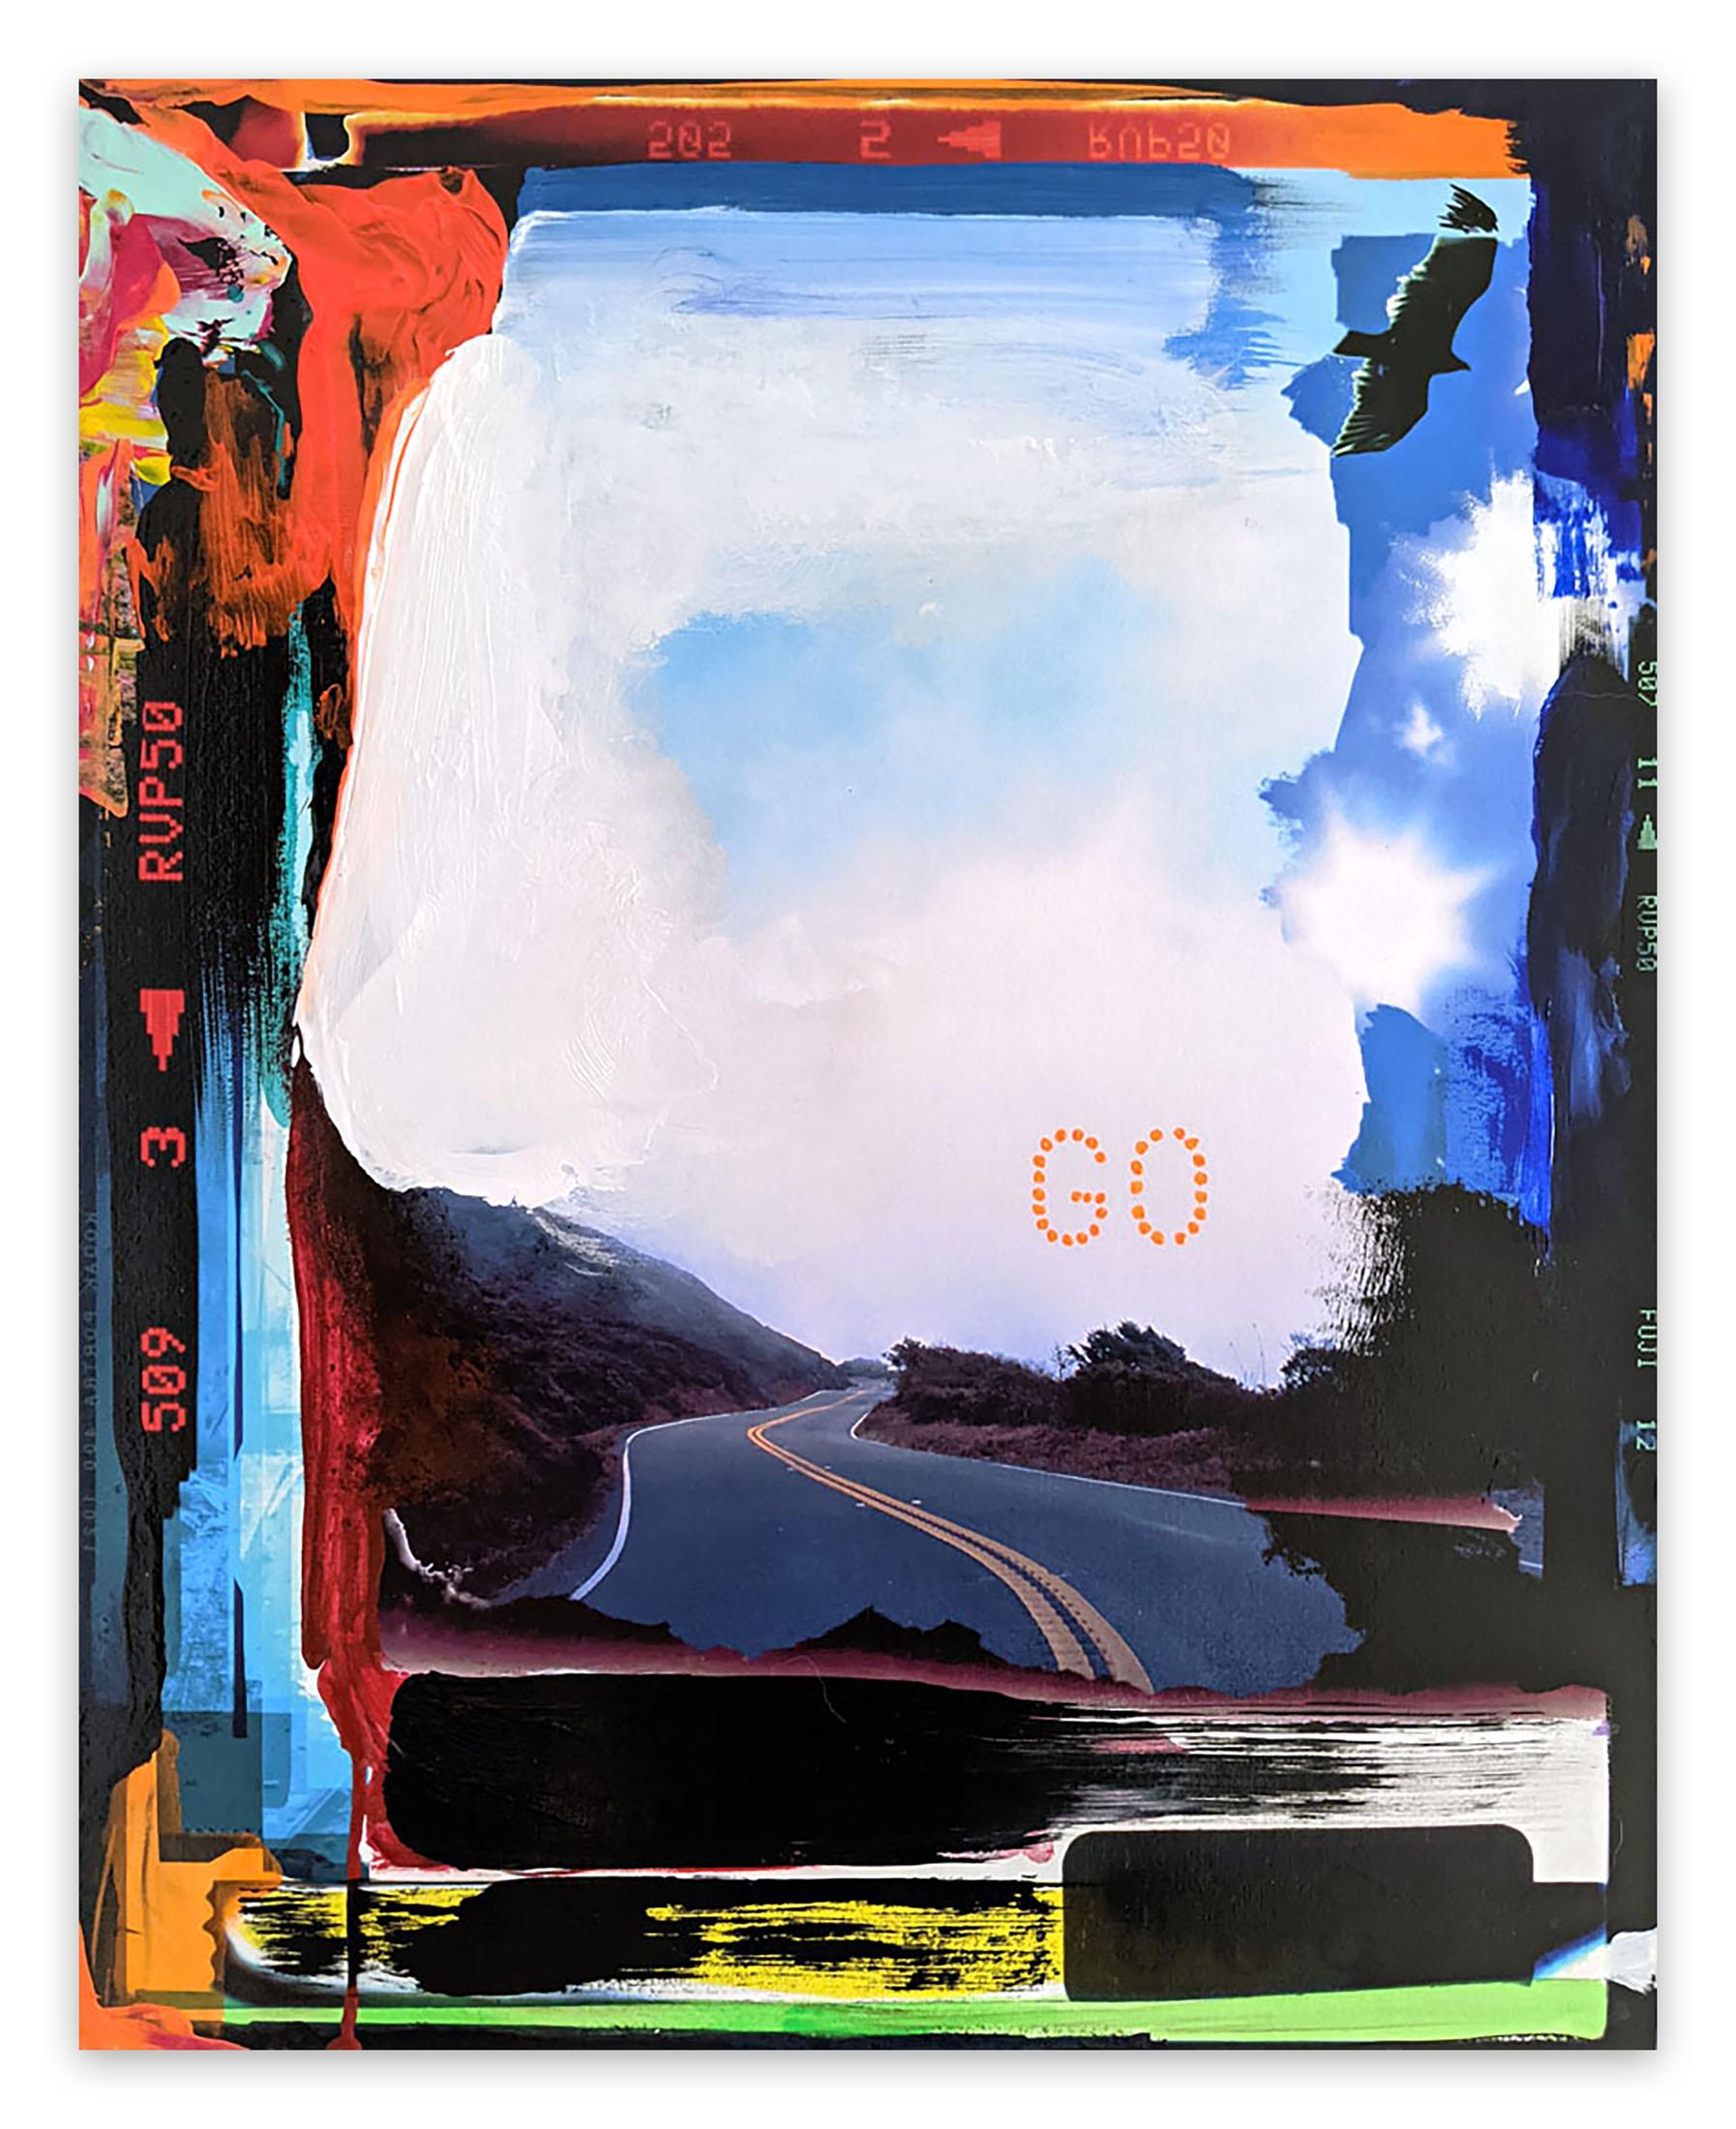 Go (Abstract Photography)

Photography/painting, mixed media - Unframed.

Artwork exclusive to IdeelArt.

Artworks are of the highest archival standards. Wood supports are sealed with two coats of Golden acrylic gel medium.
Photographs are printed